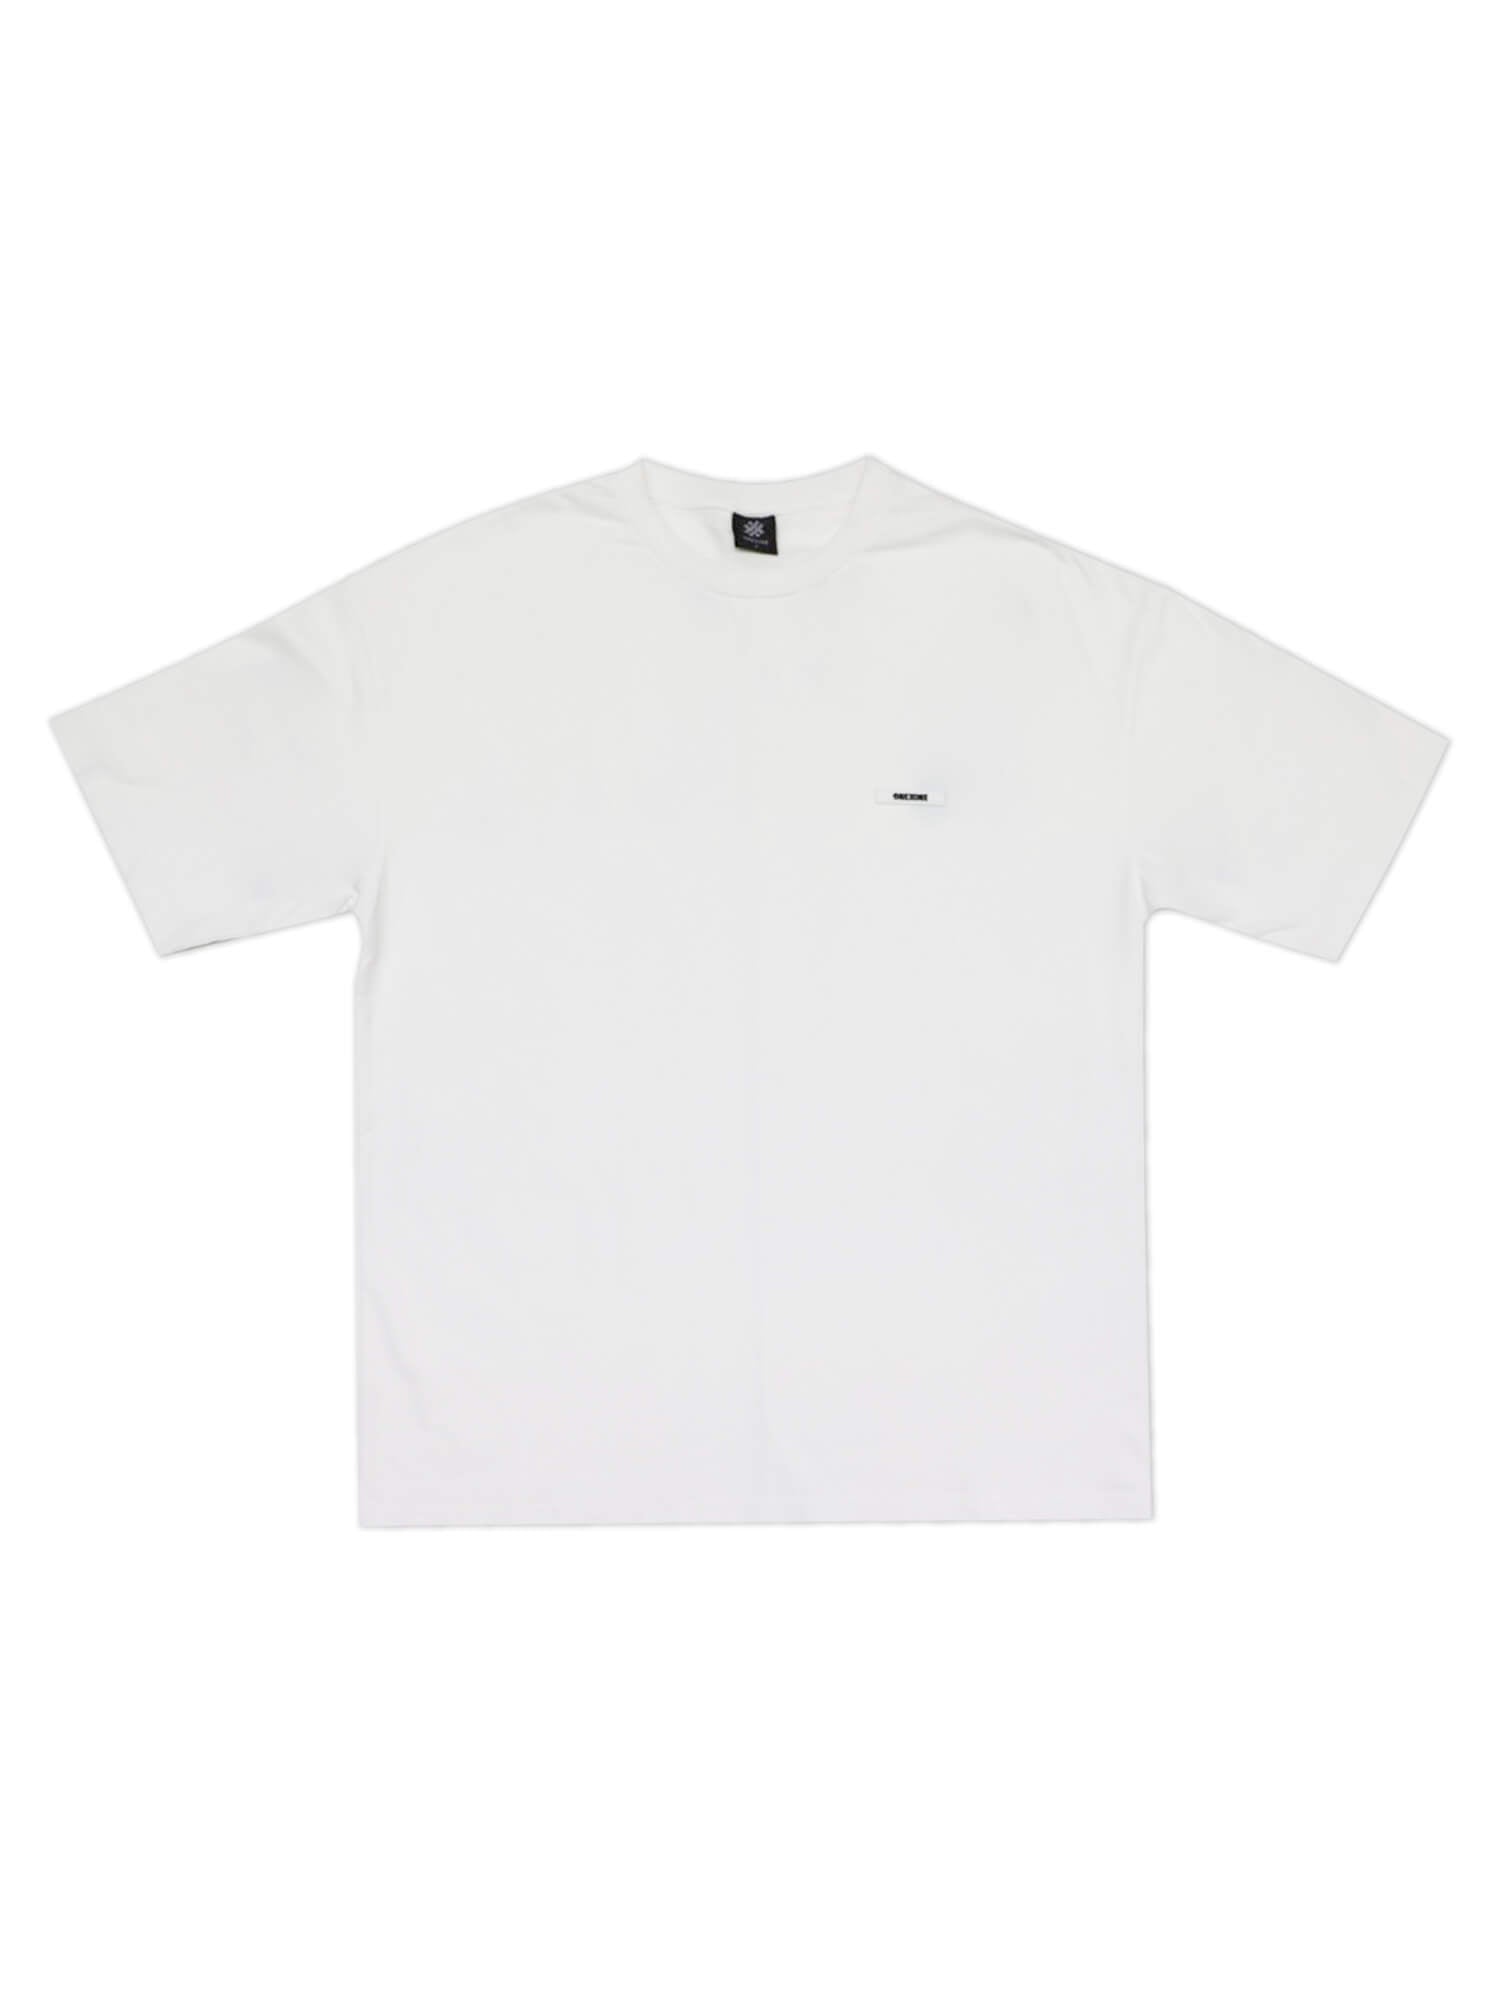 CHILAX TEE / WHITE – ONEXONE OFFICIAL